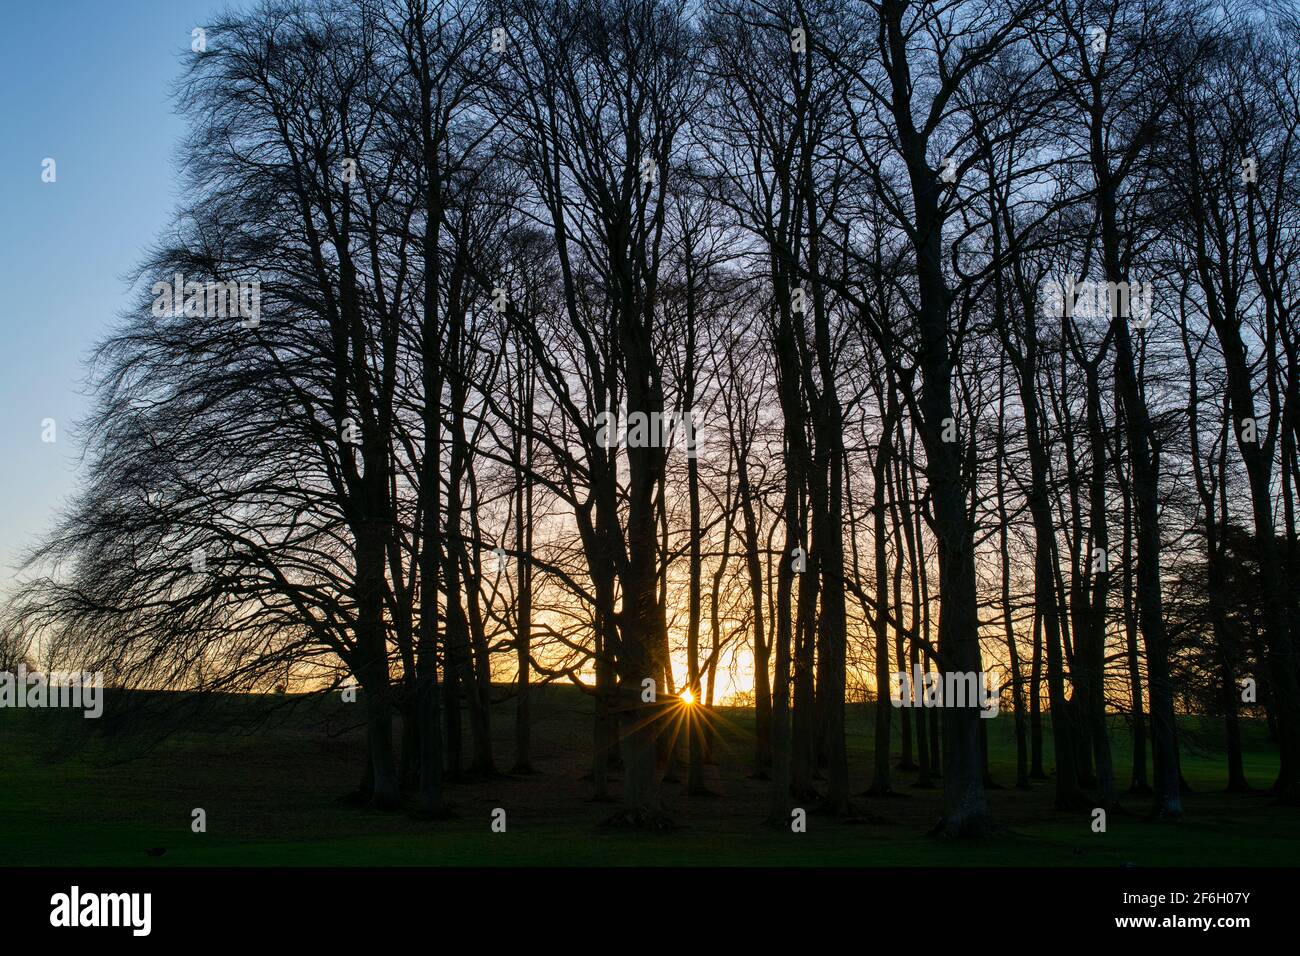 Silhouette copper beech trees in early spring at sunrise. Blenheim palace park. Woodstock, Oxfordshire, England Stock Photo